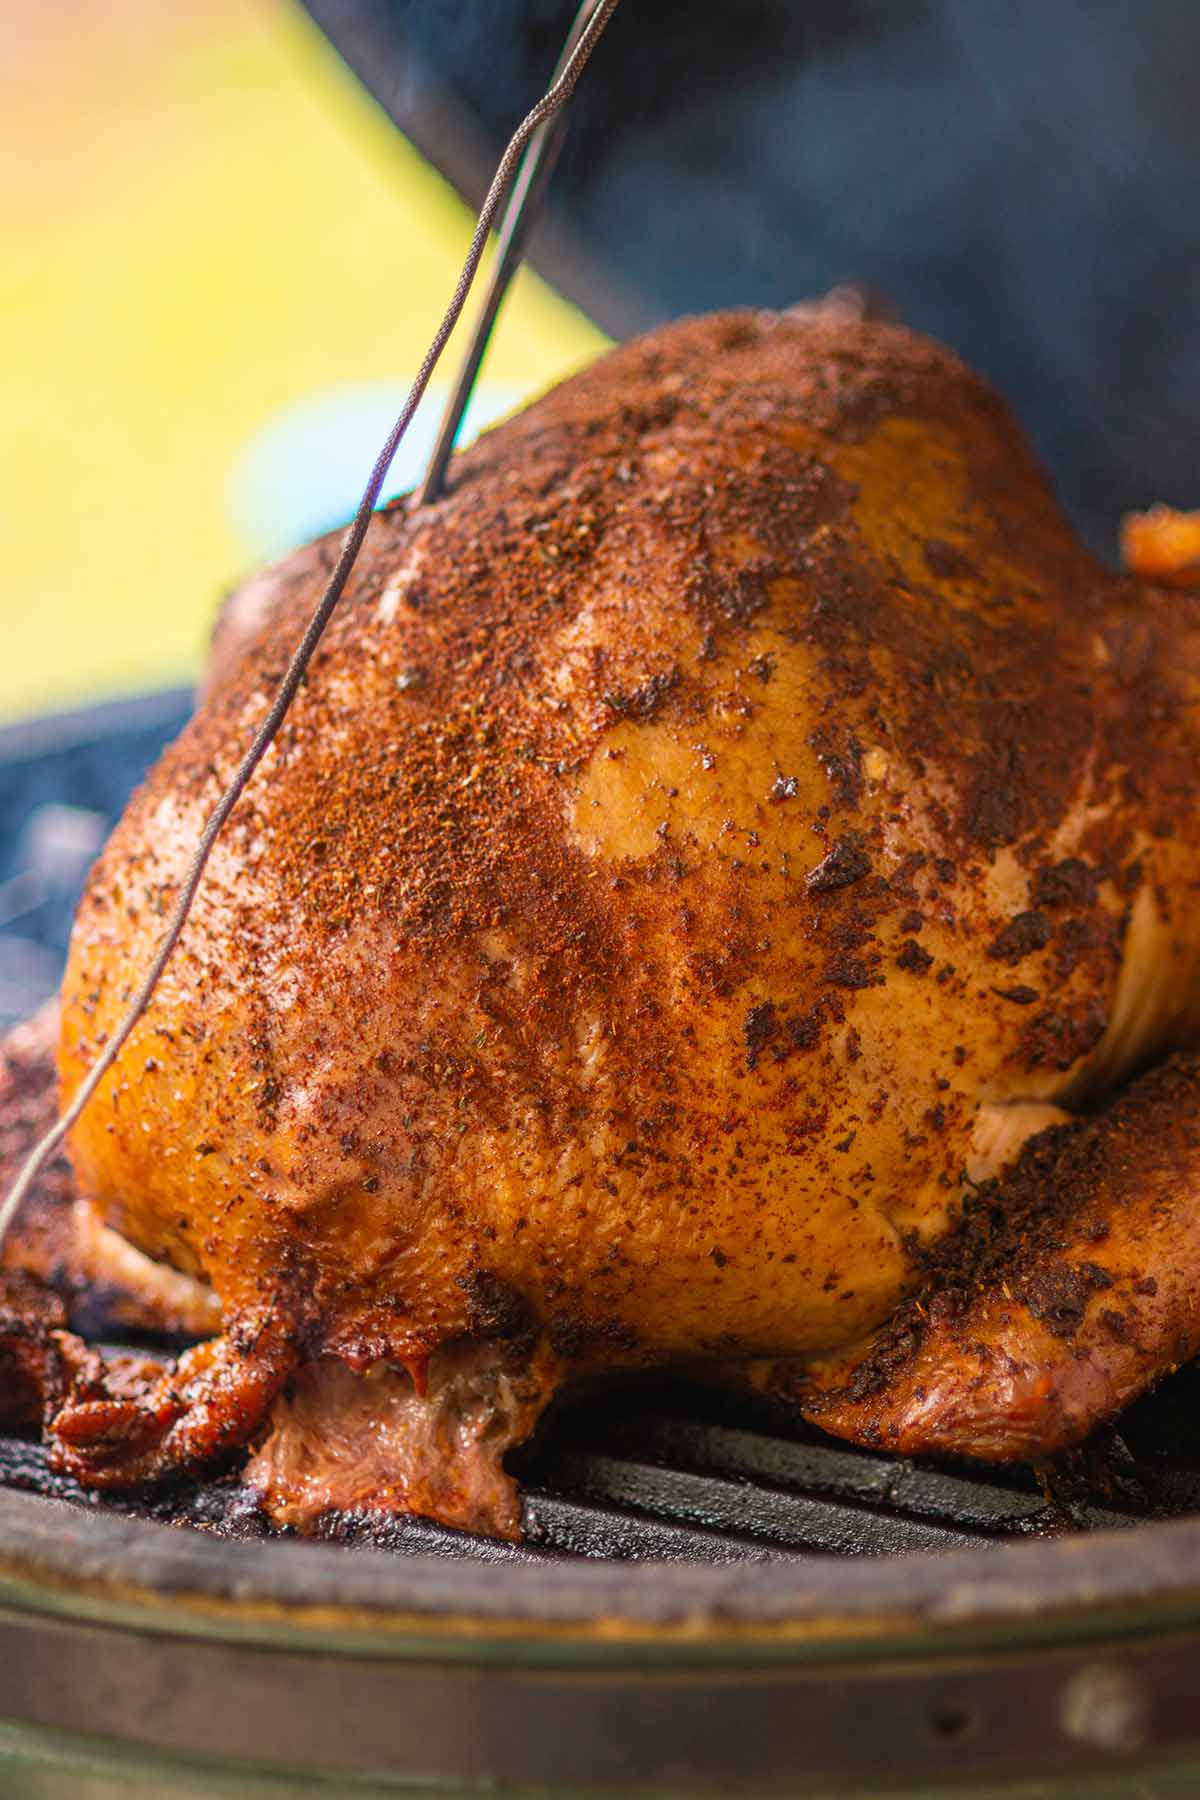 A whole turkey being smoked on a big green egg seasoned with cajun seasoning.